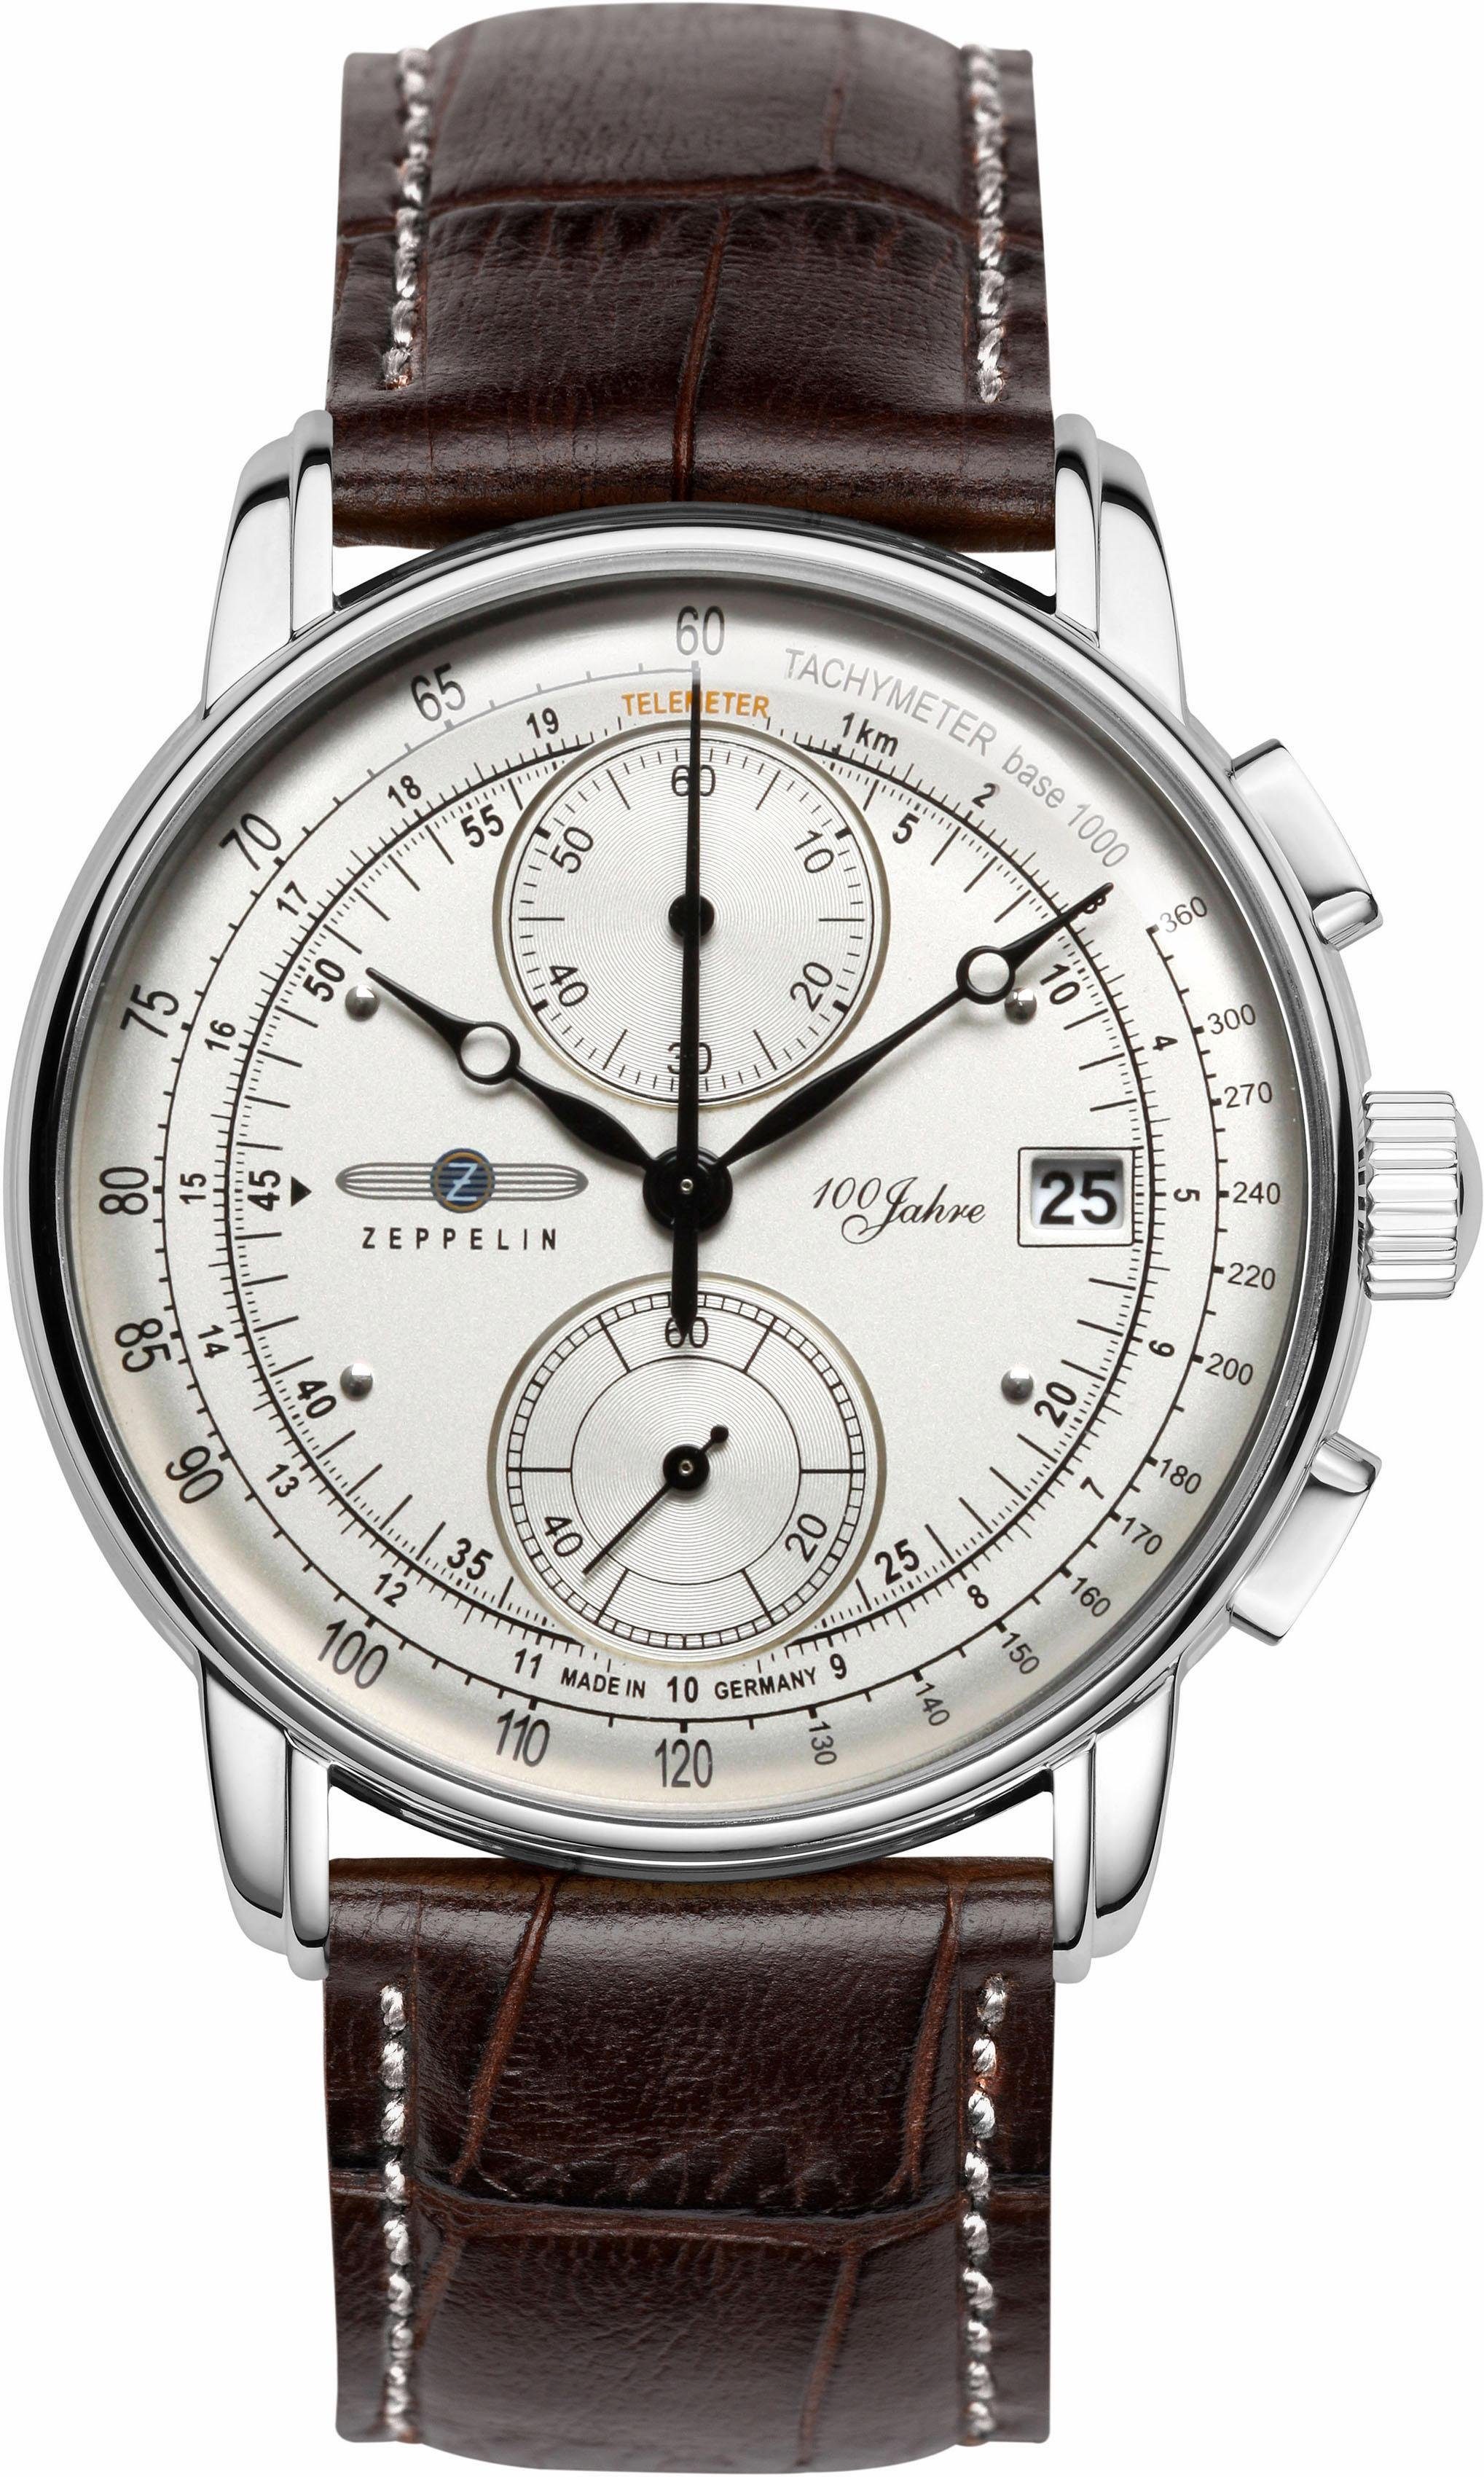 ZEPPELIN Chronograph 100 made Jahre Germany Zeppelin, in 86701